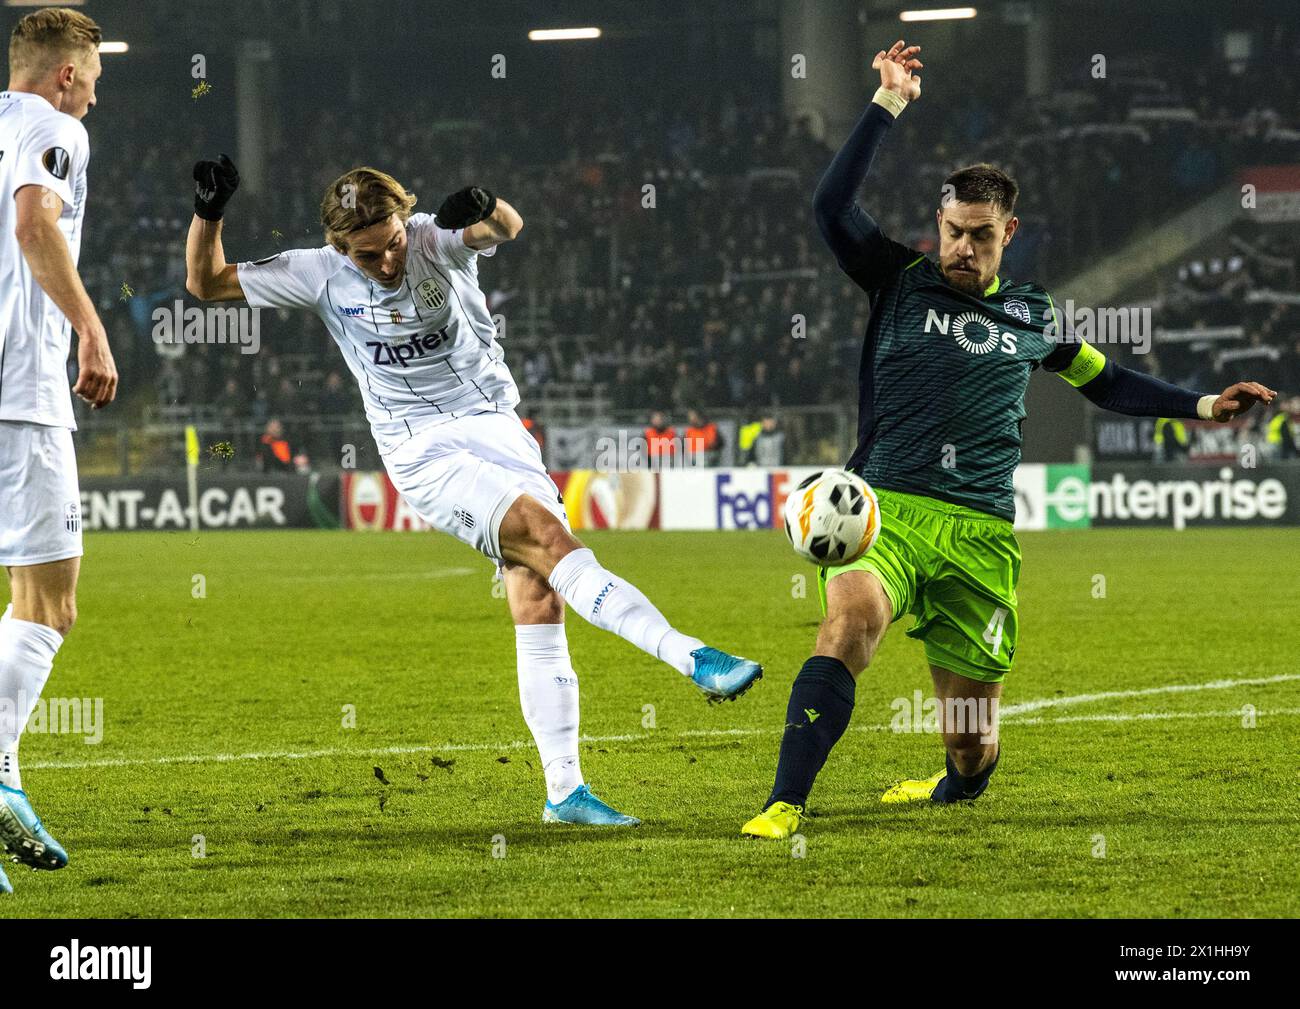 UEFA Europa League Group D football match between Linzer ASK (LASK) and Sporting CP Clube de Portugal  in Linz, Austria, on December 12, 2019. PICTURE:  Marko Raguz (LASK), Sebastian Coates (Sporting Clube de Portugal) - 20191212 PD10993 - Rechteinfo: Rights Managed (RM) Stock Photo